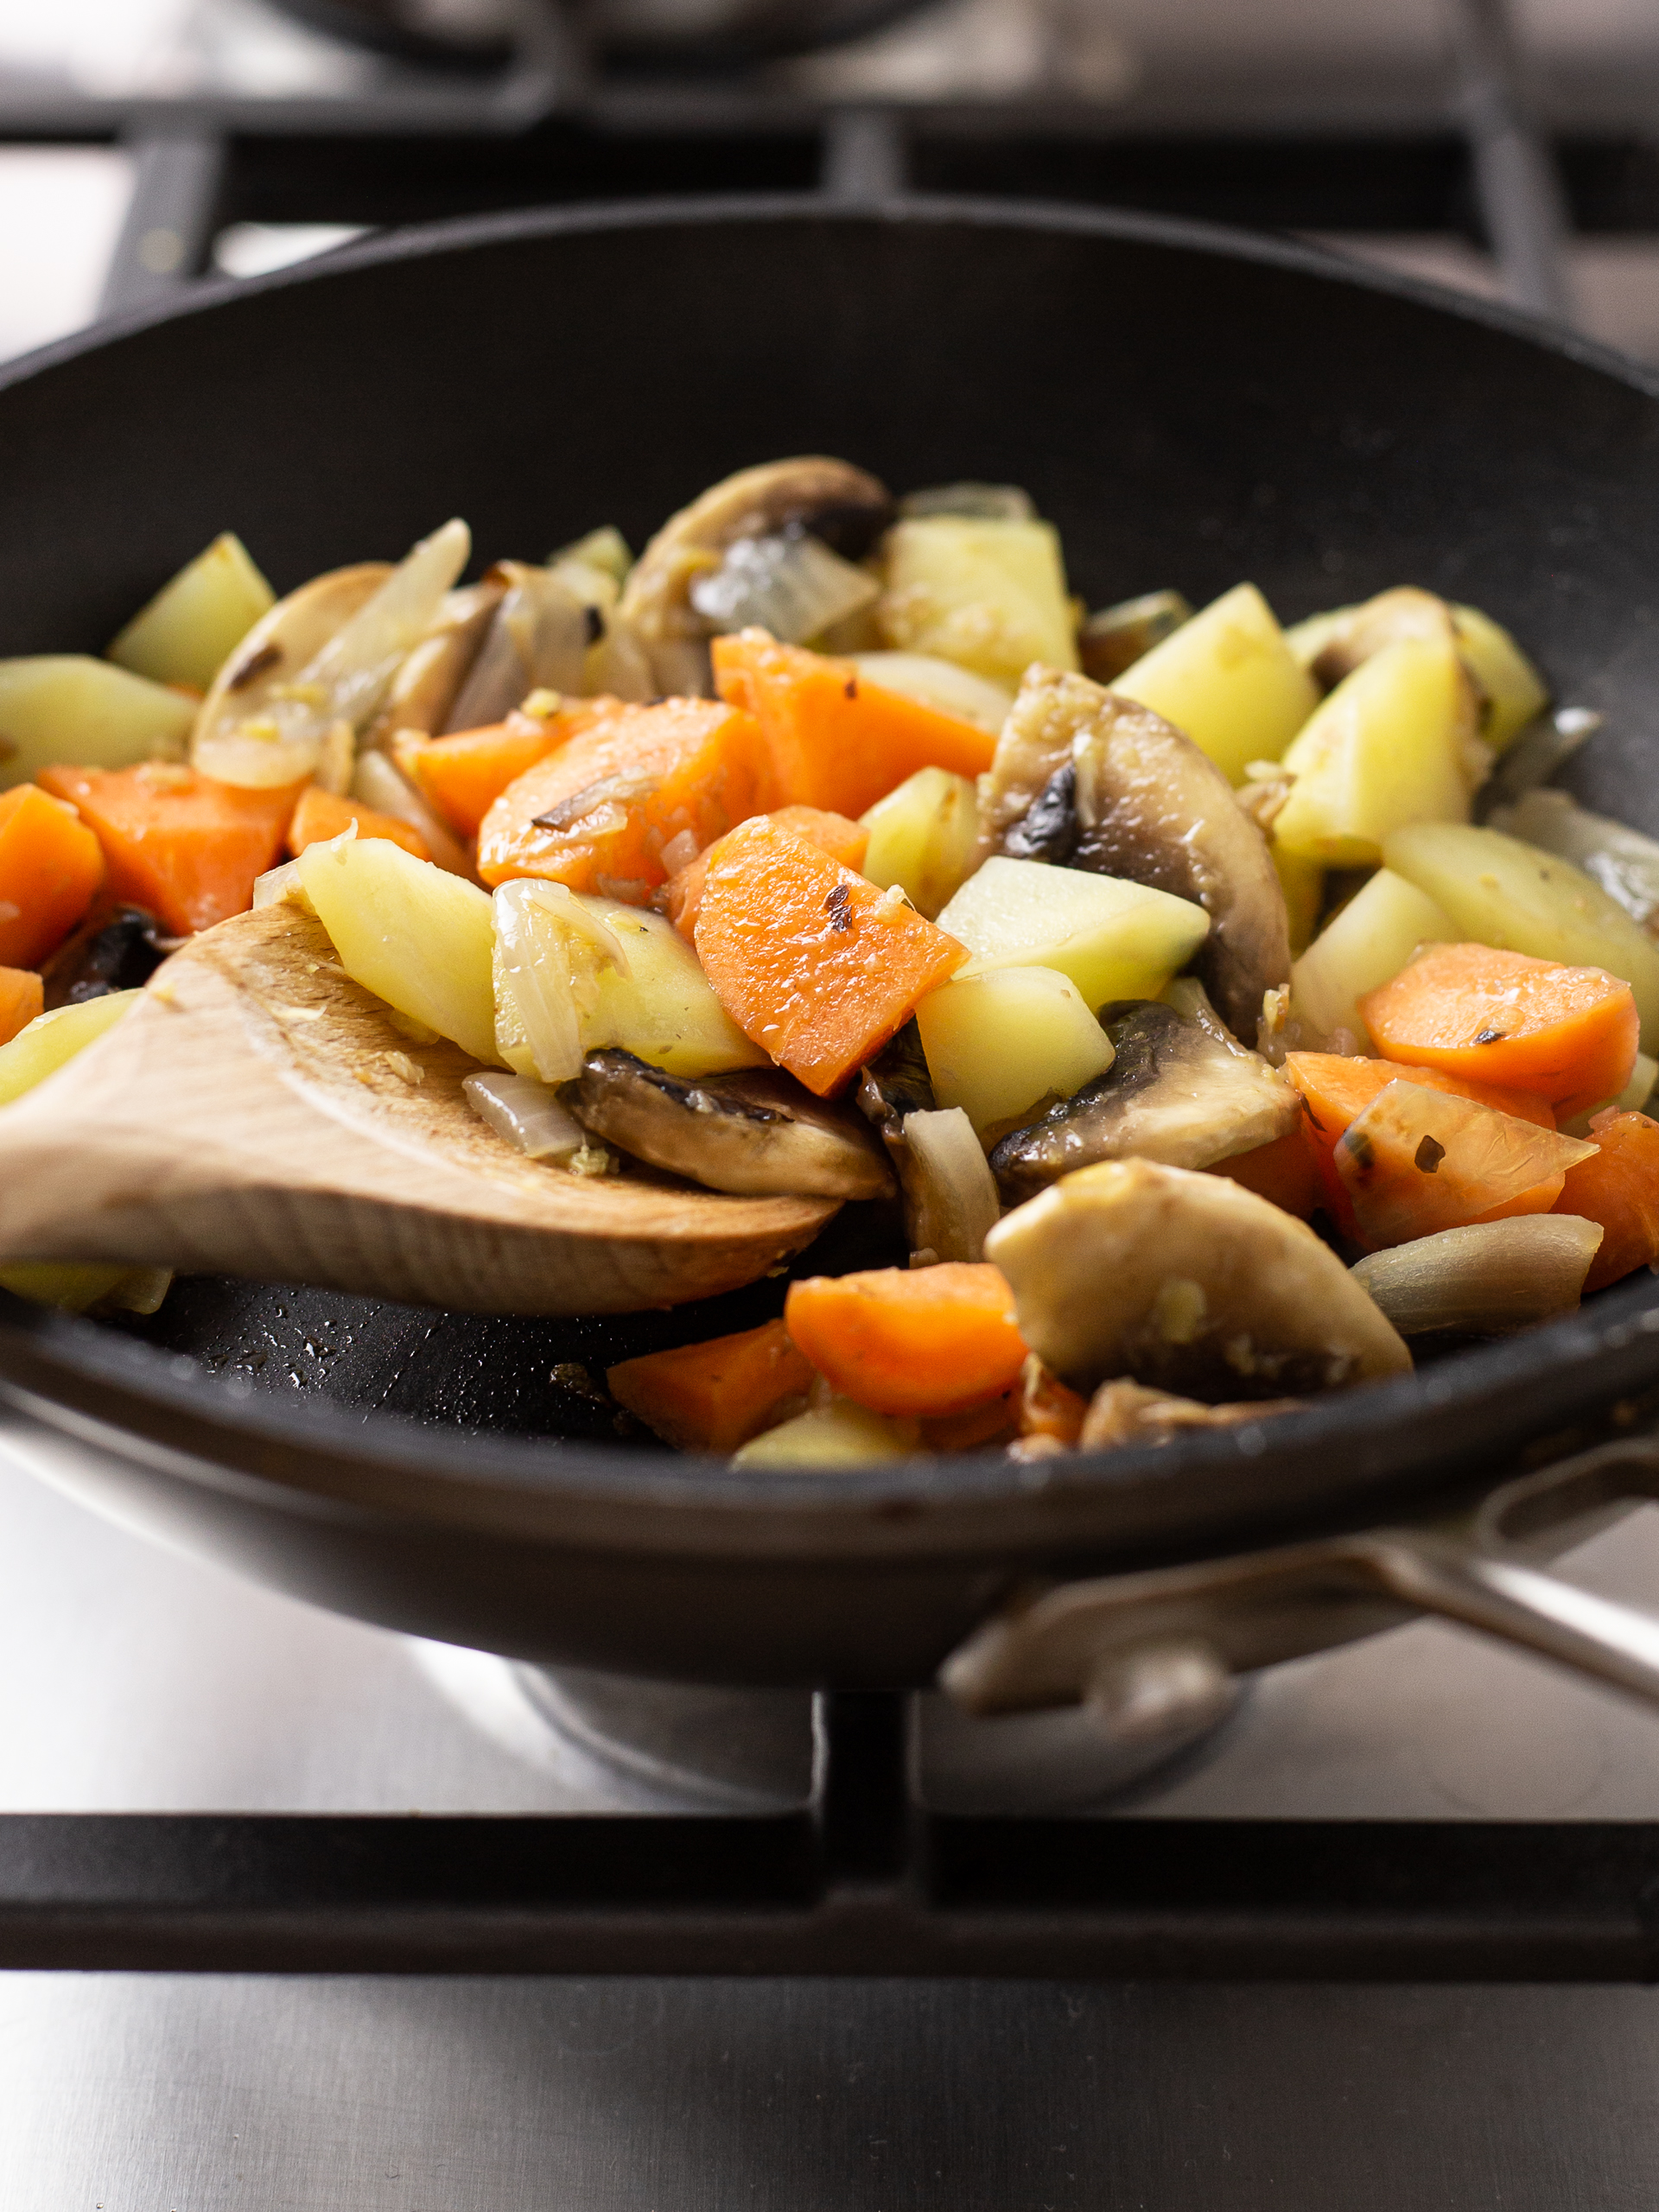 cooked potatoes, mushrooms, and carrots in a pan